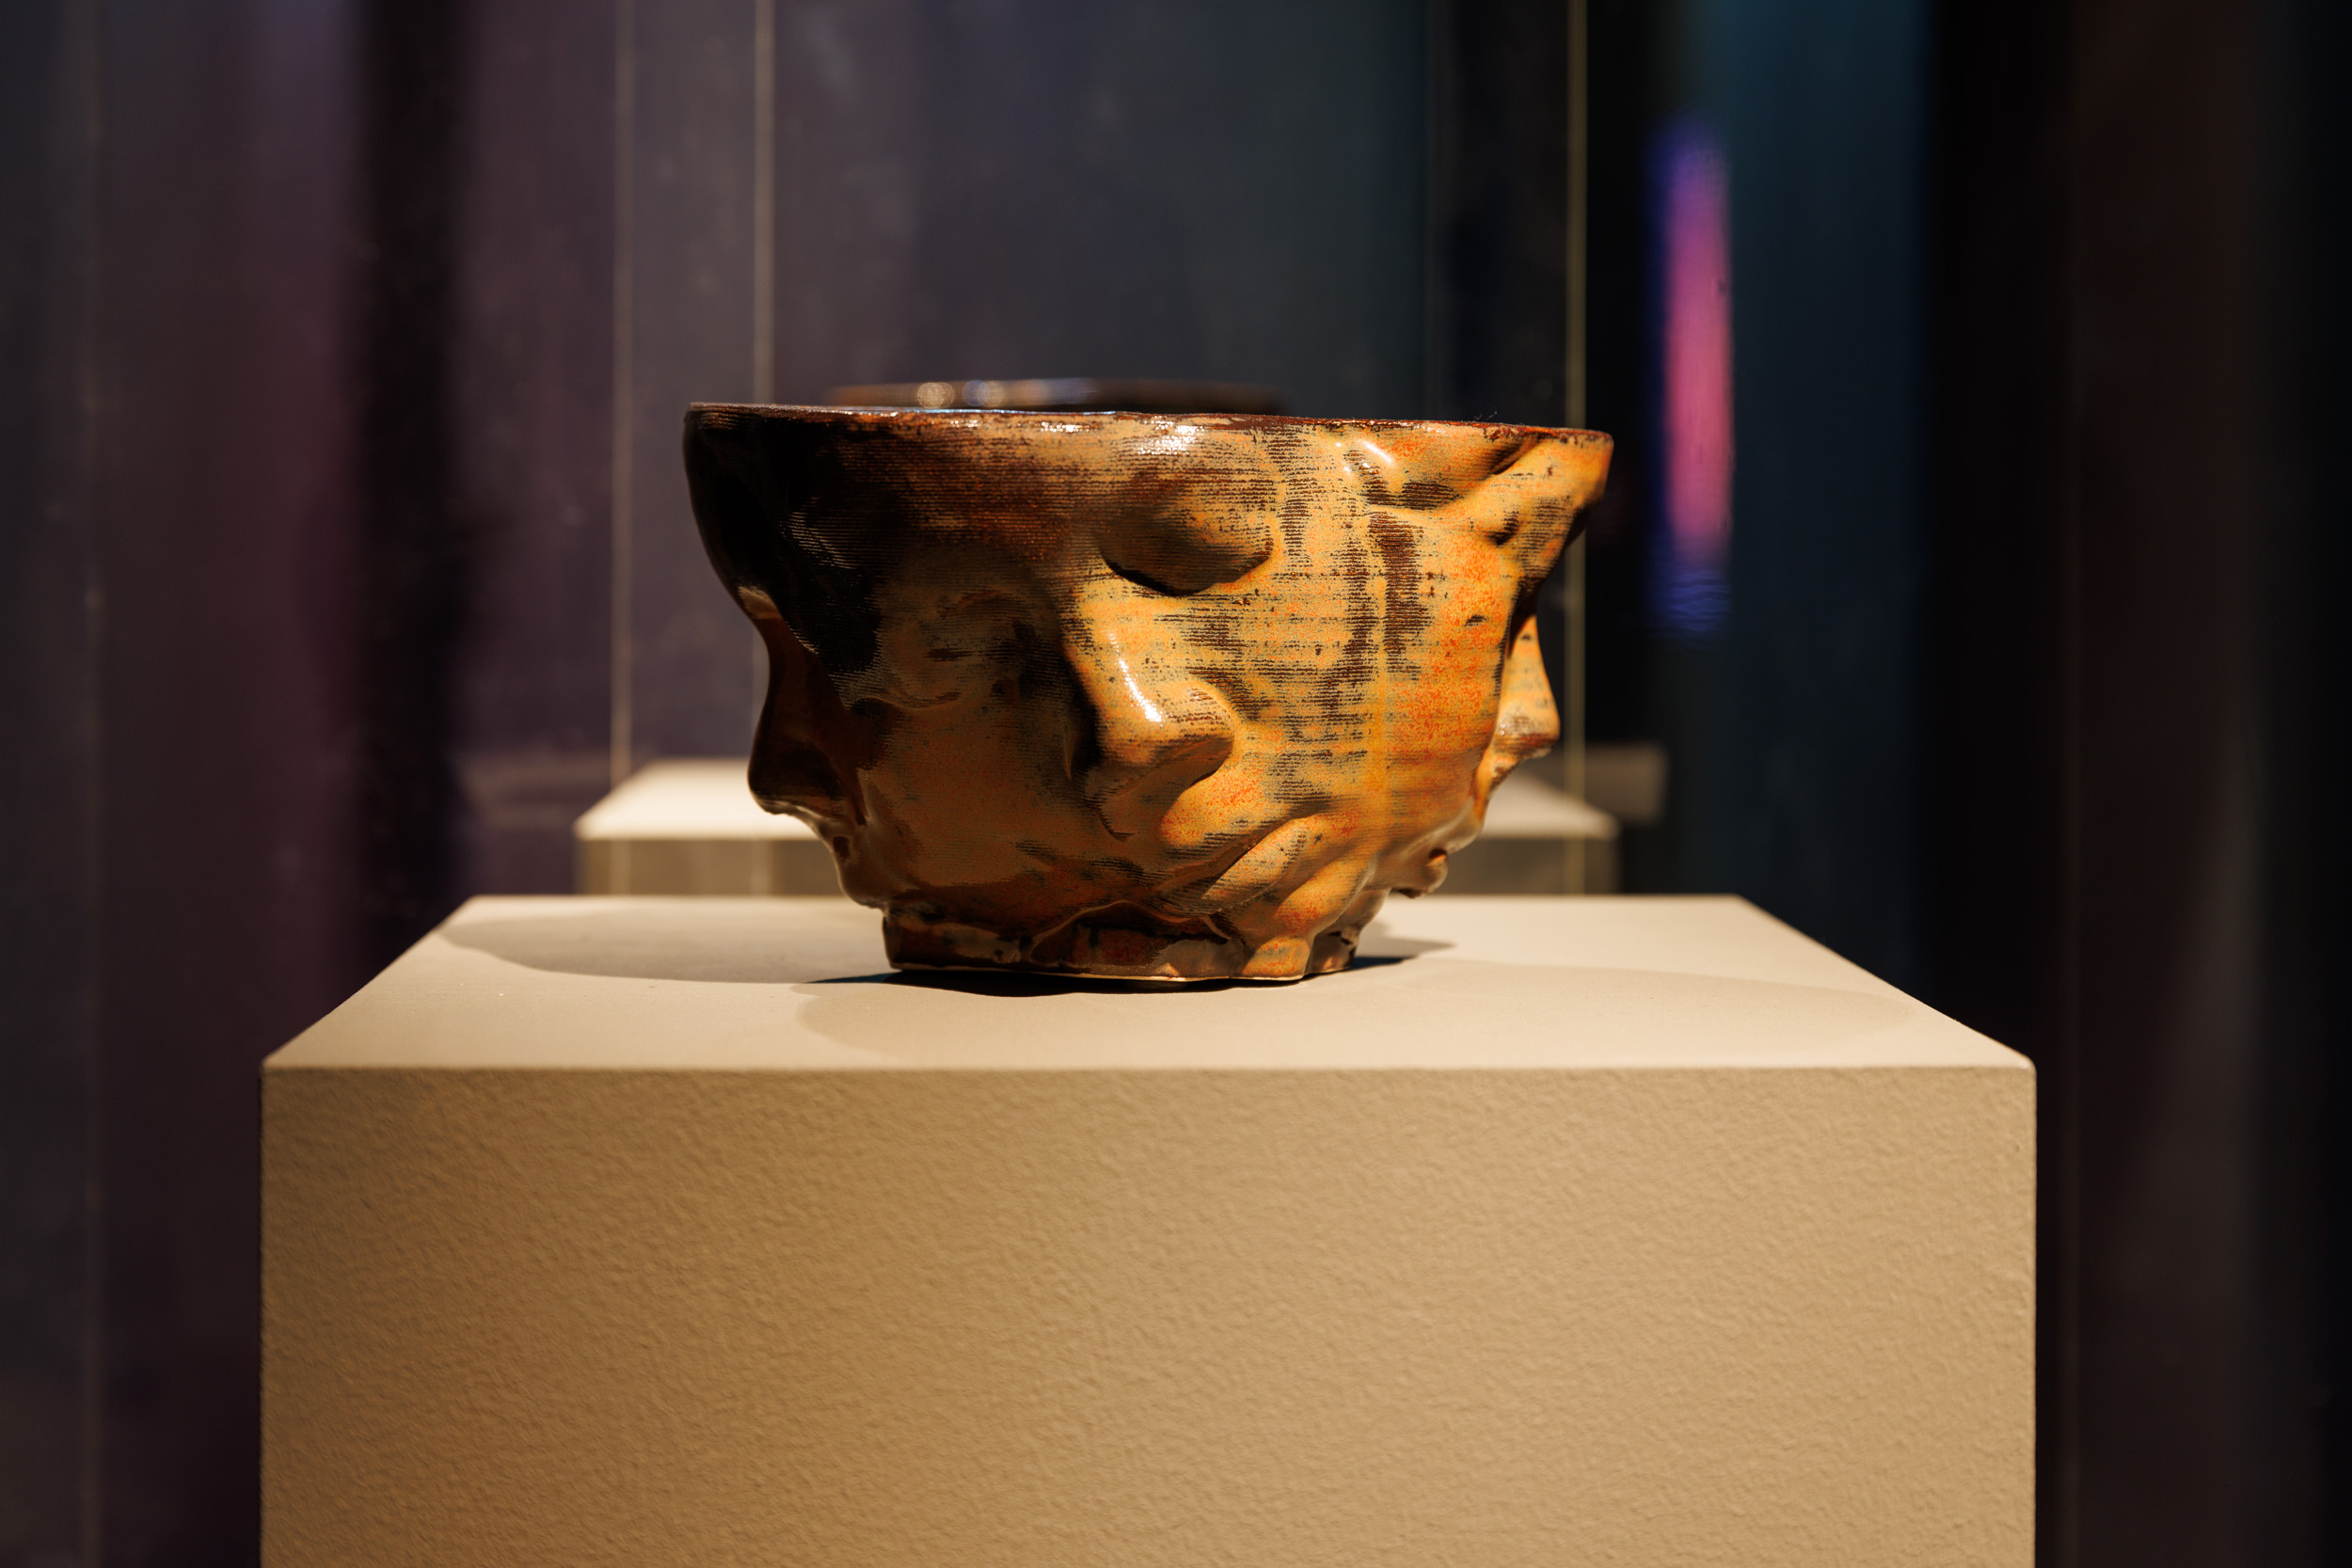 Brown and red glazed ceramic piece on top of a plinth, in a dark room, depicting faces with their eyes closed.